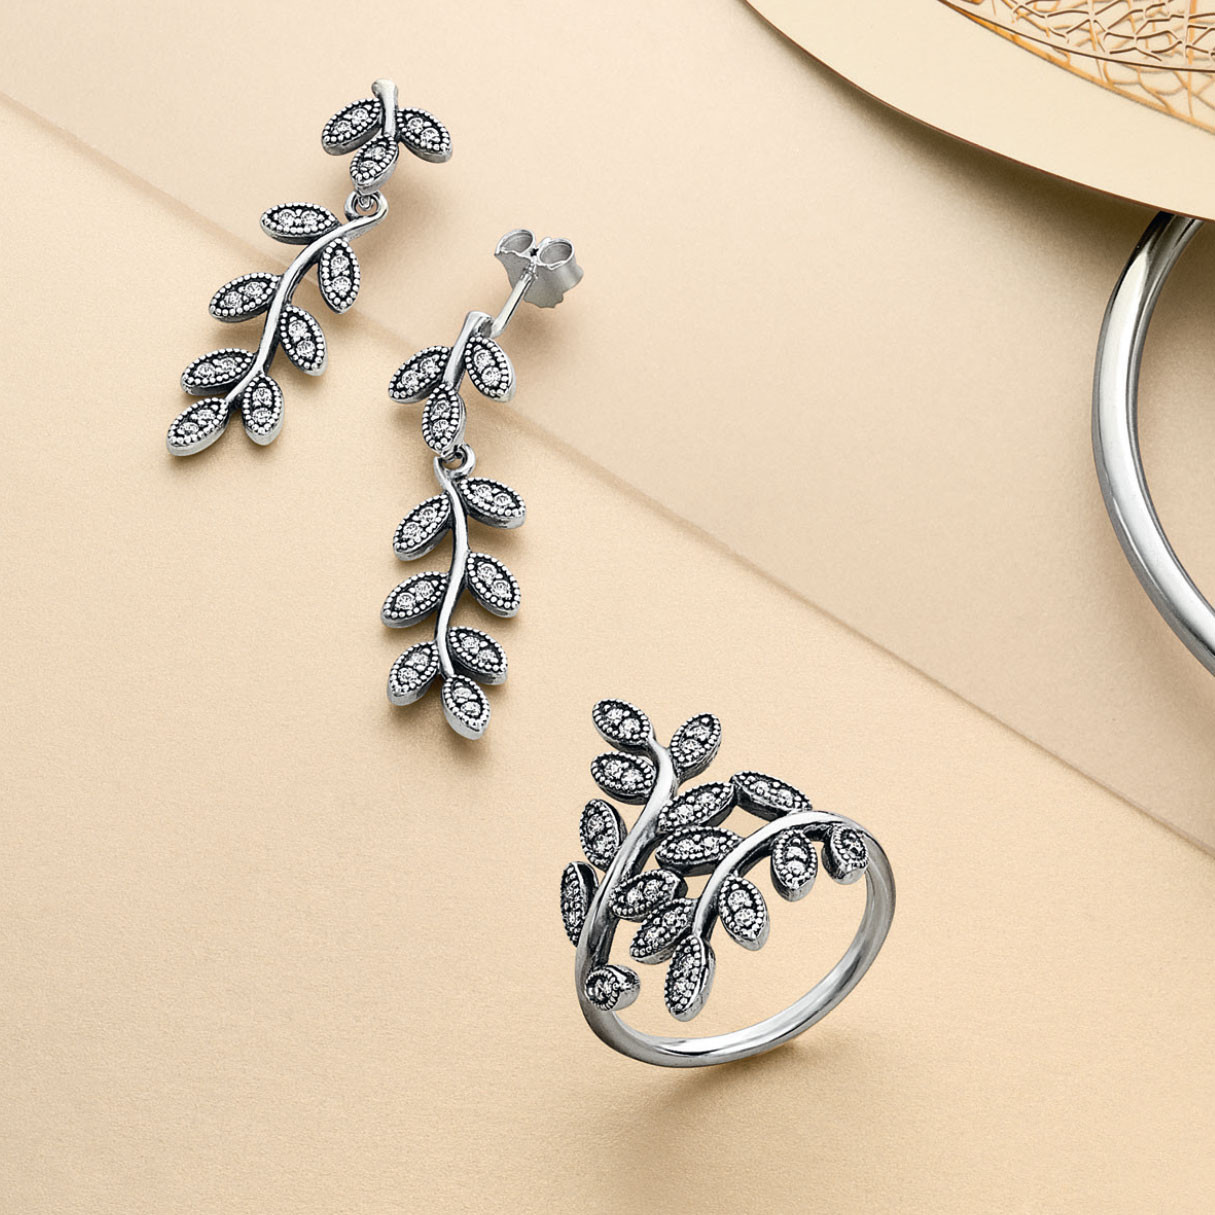 I Like The Way Your Sparkling Earrings Lay
 PANDORA Sparkling Leaves with Clear CZ Dangle Earrings